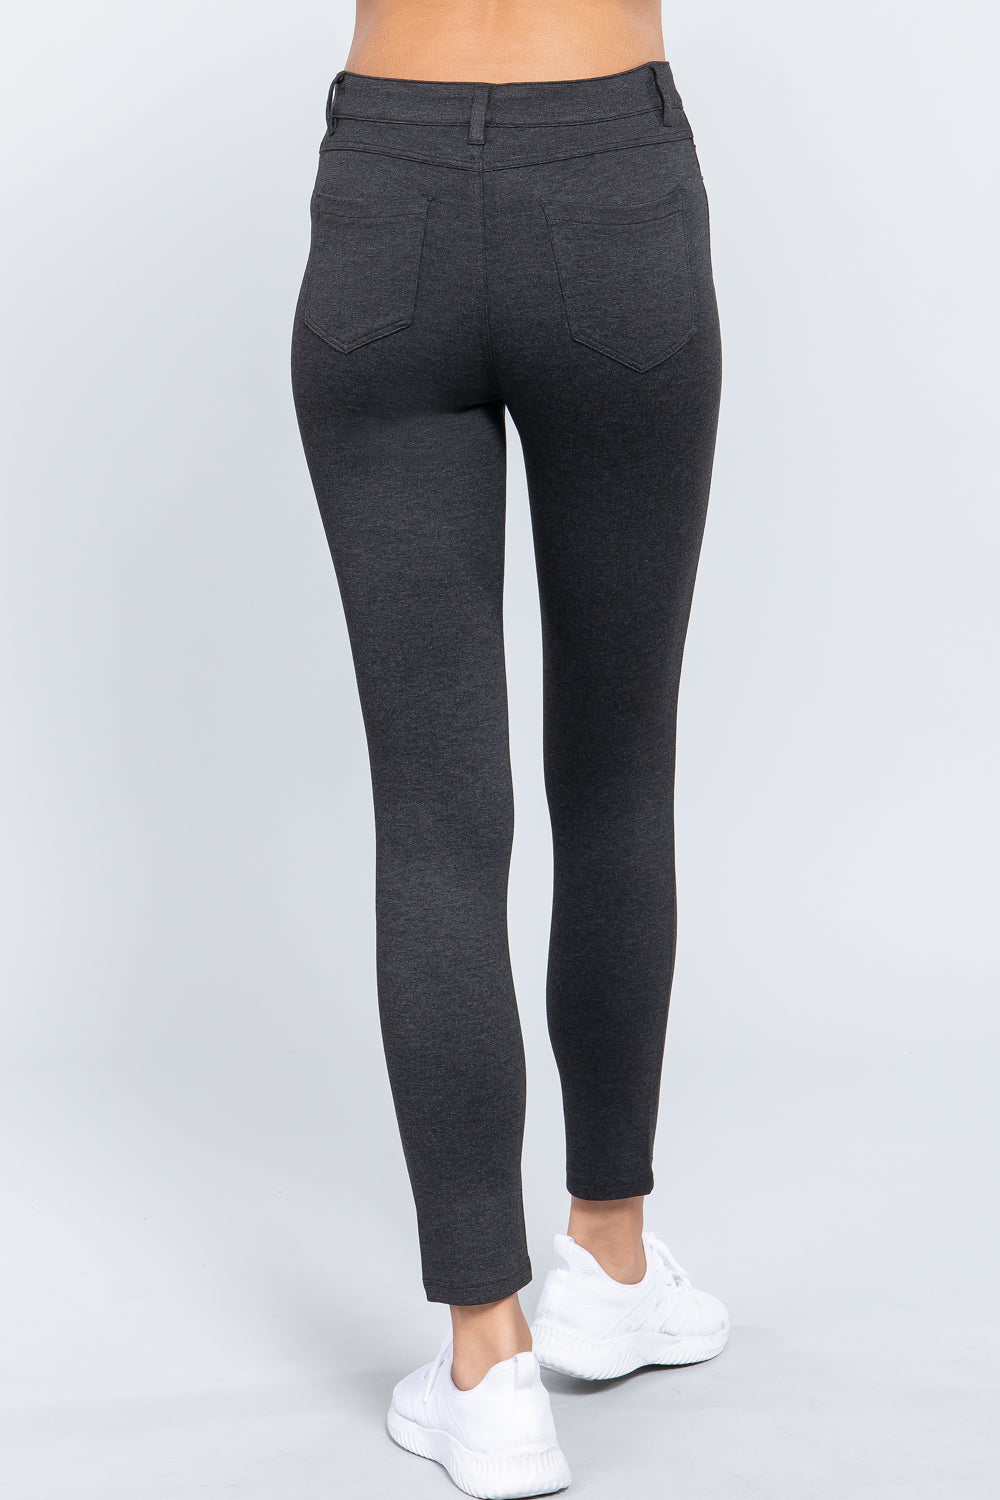 5-pockets Shape Skinny Ponte Mid-rise Pants in Charcoal Grey